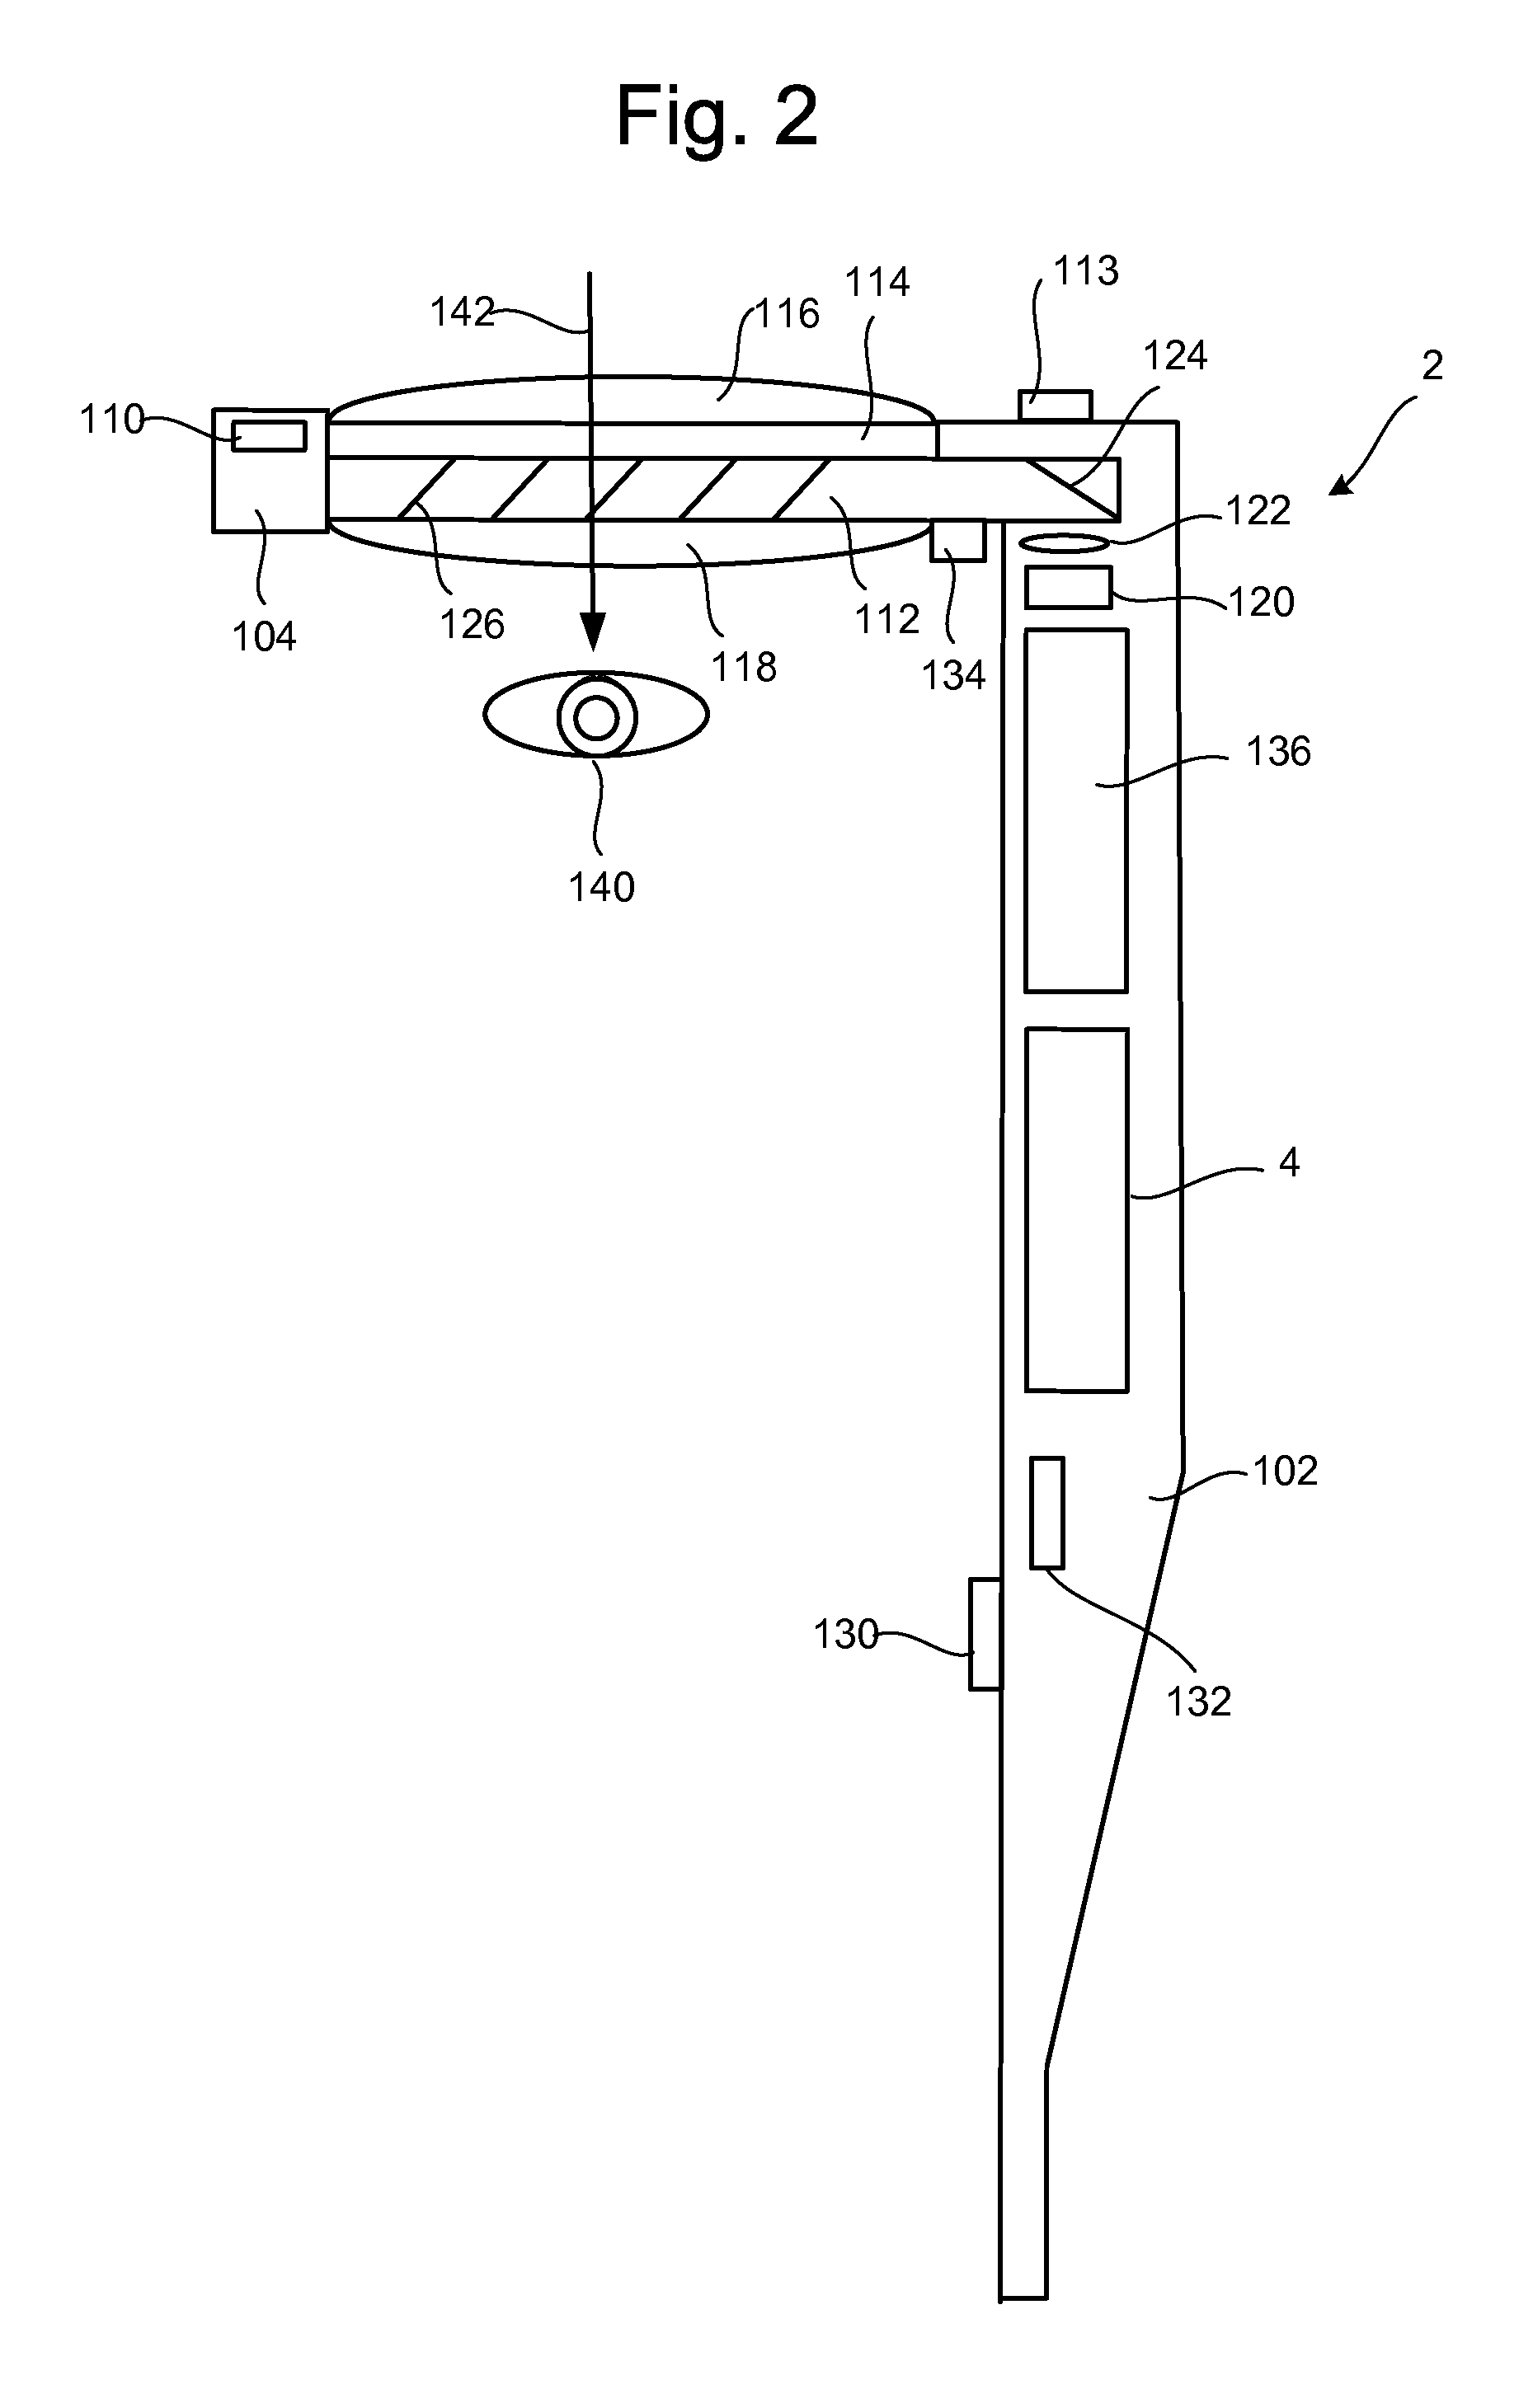 Connecting Head Mounted Displays To External Displays And Other Communication Networks